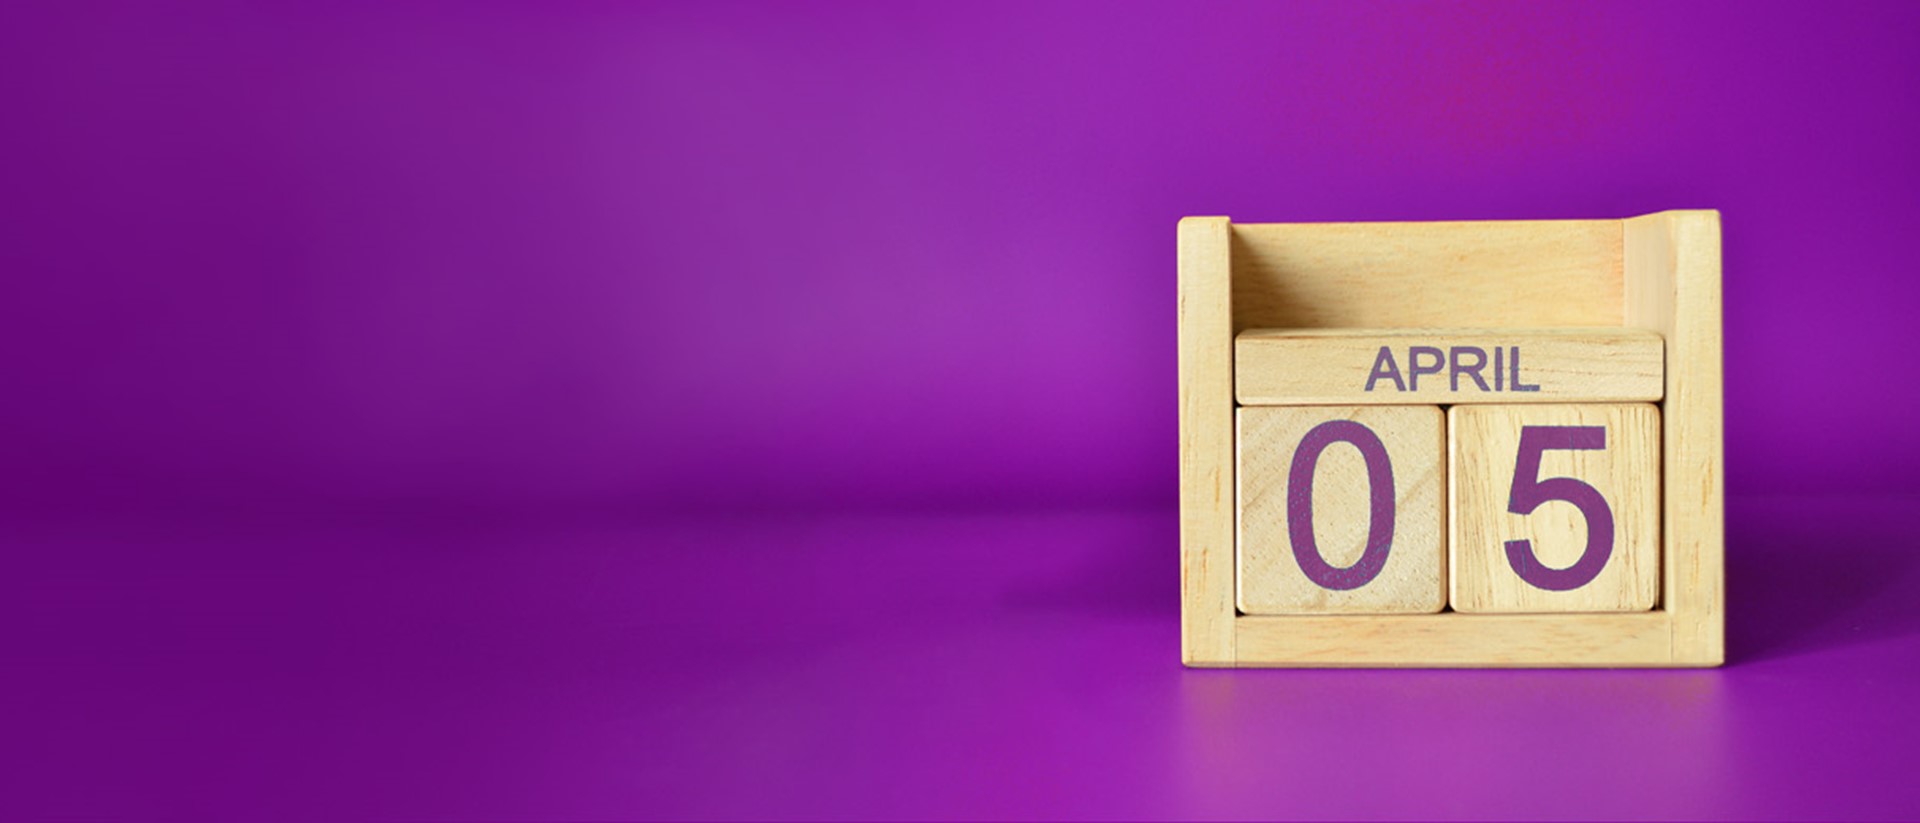 Wooden calendar block with the date of 5th April against a purple background